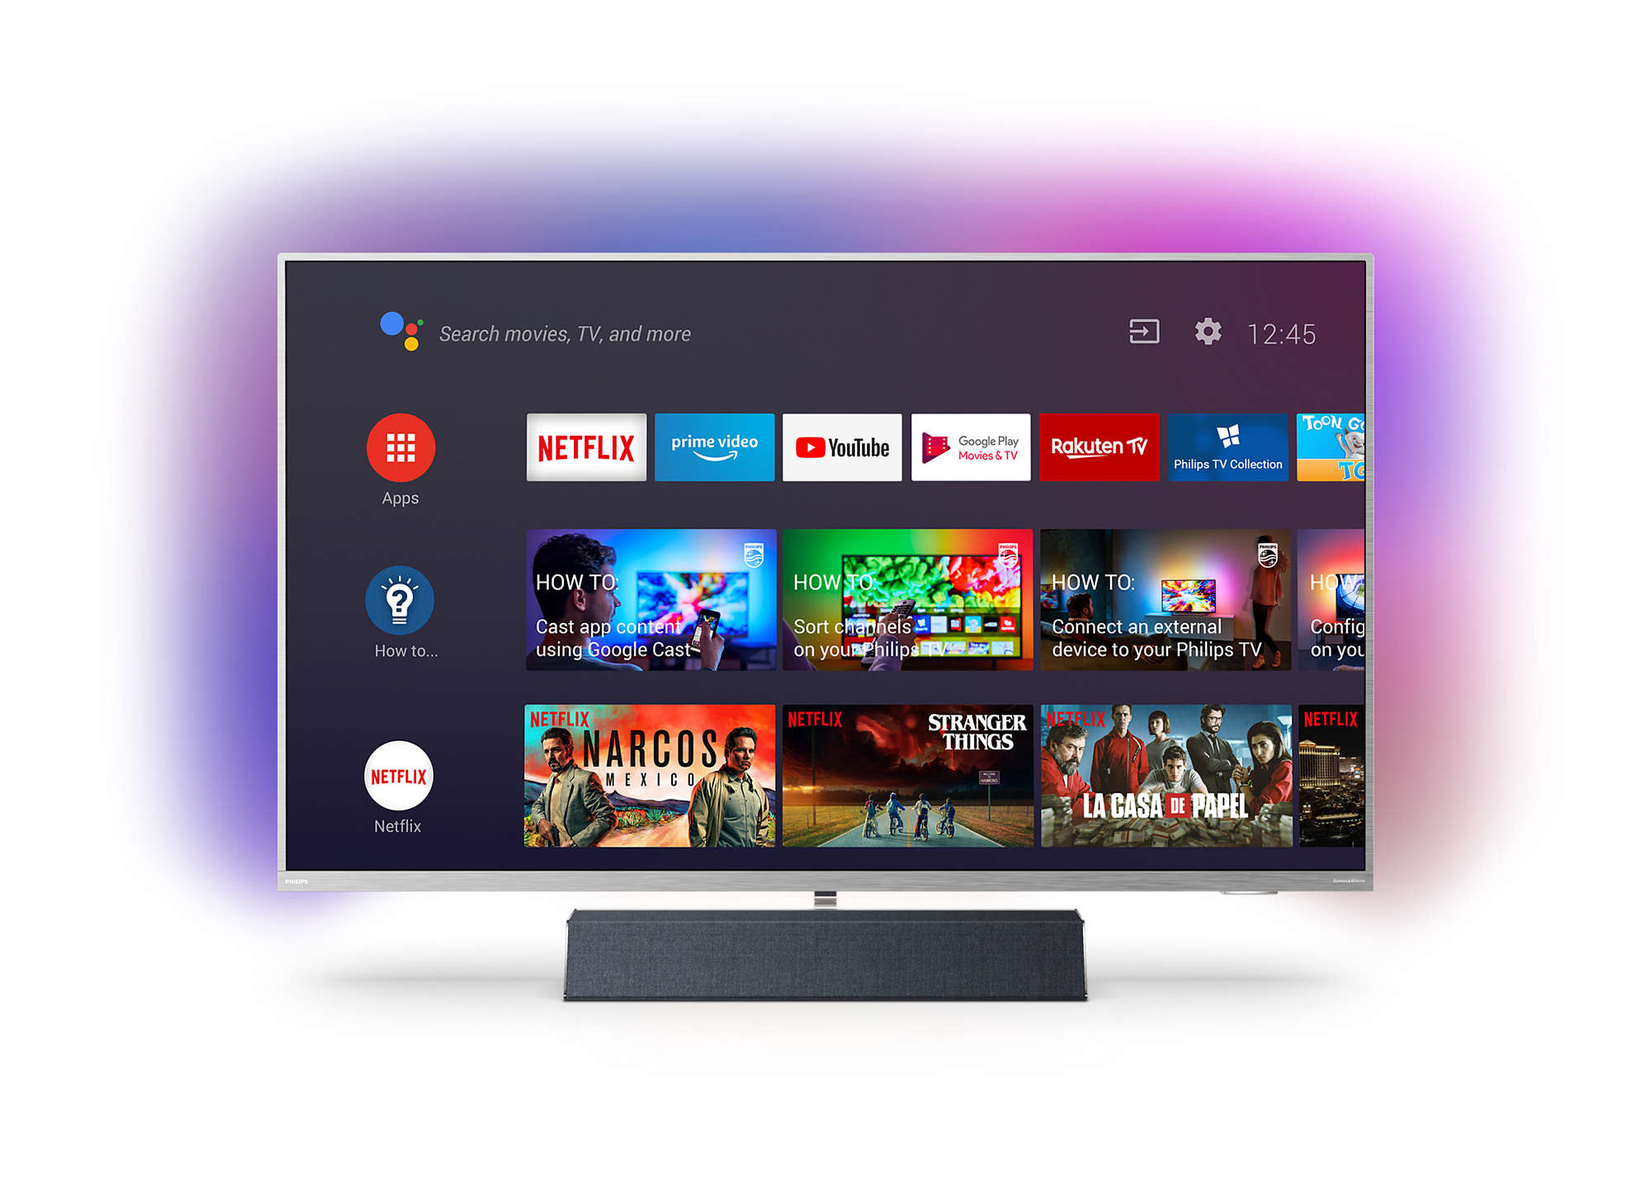 109,22 UHD 109,2 cm, Zoll) TV 9 Android (43 Ambilight, (Flat, 4K, PHILIPS / Zoll 43PUS9235/12 cm LED 43 (Pie)) TV™